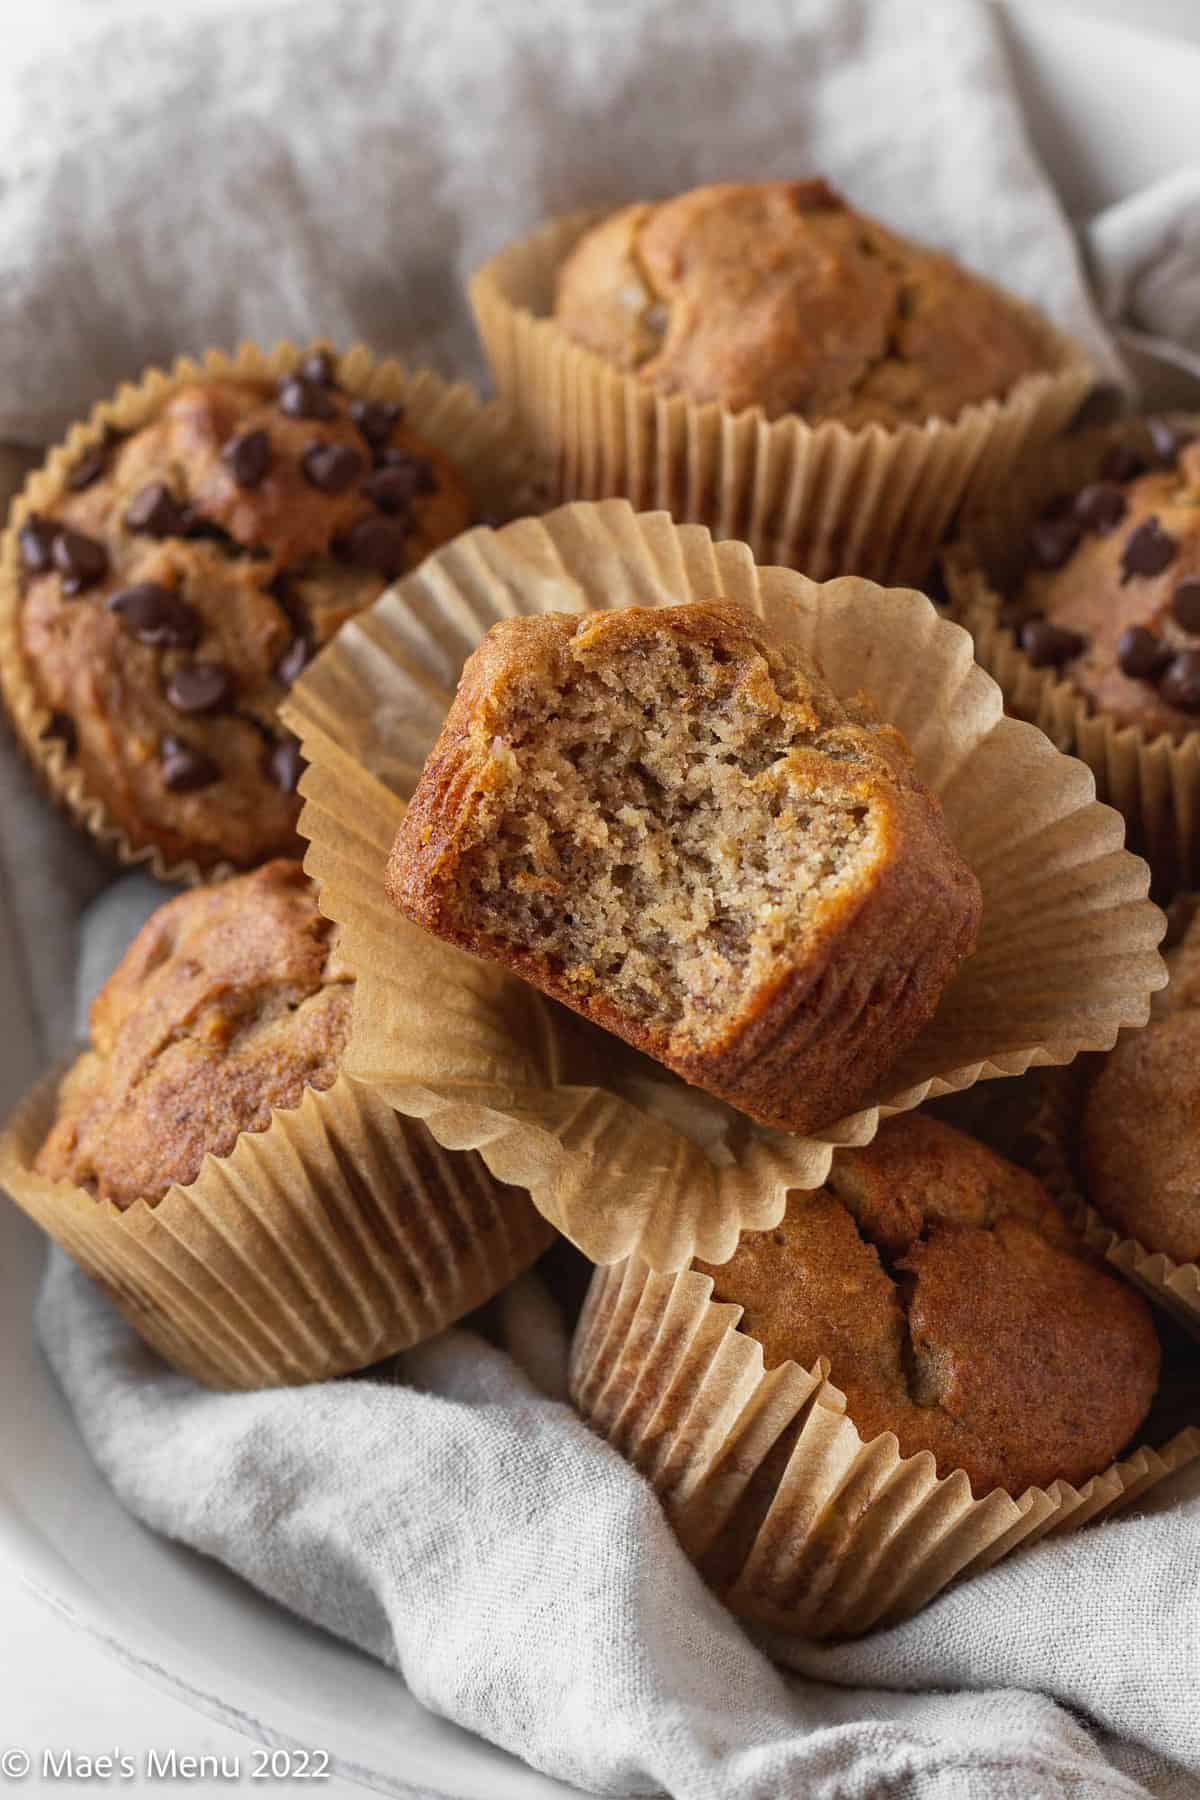 hero shot of a bowl of plain and chocolate chip-flecked banana muffins with the top one having a bite taken out of it.